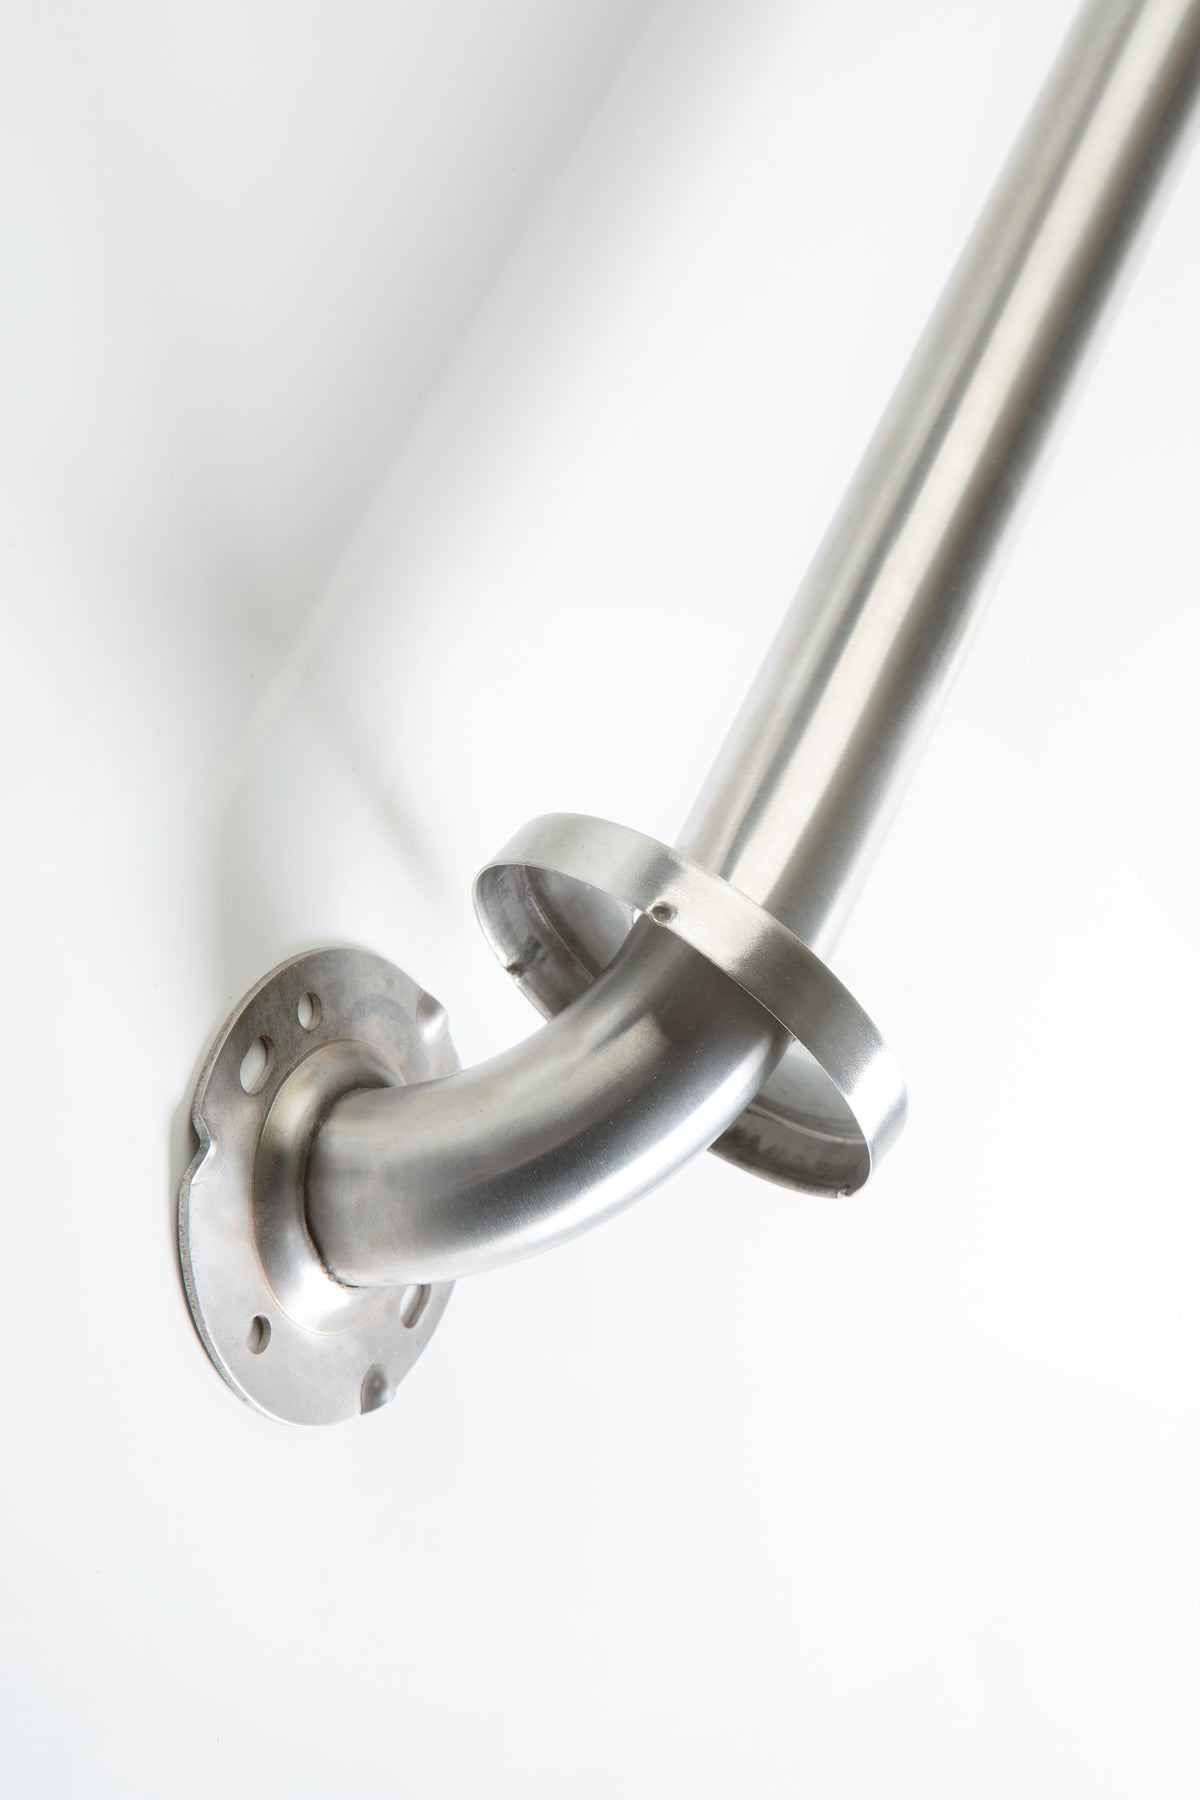 Stainless Steel Straight Grab Bar in Satin, Polished, or Peened Finish